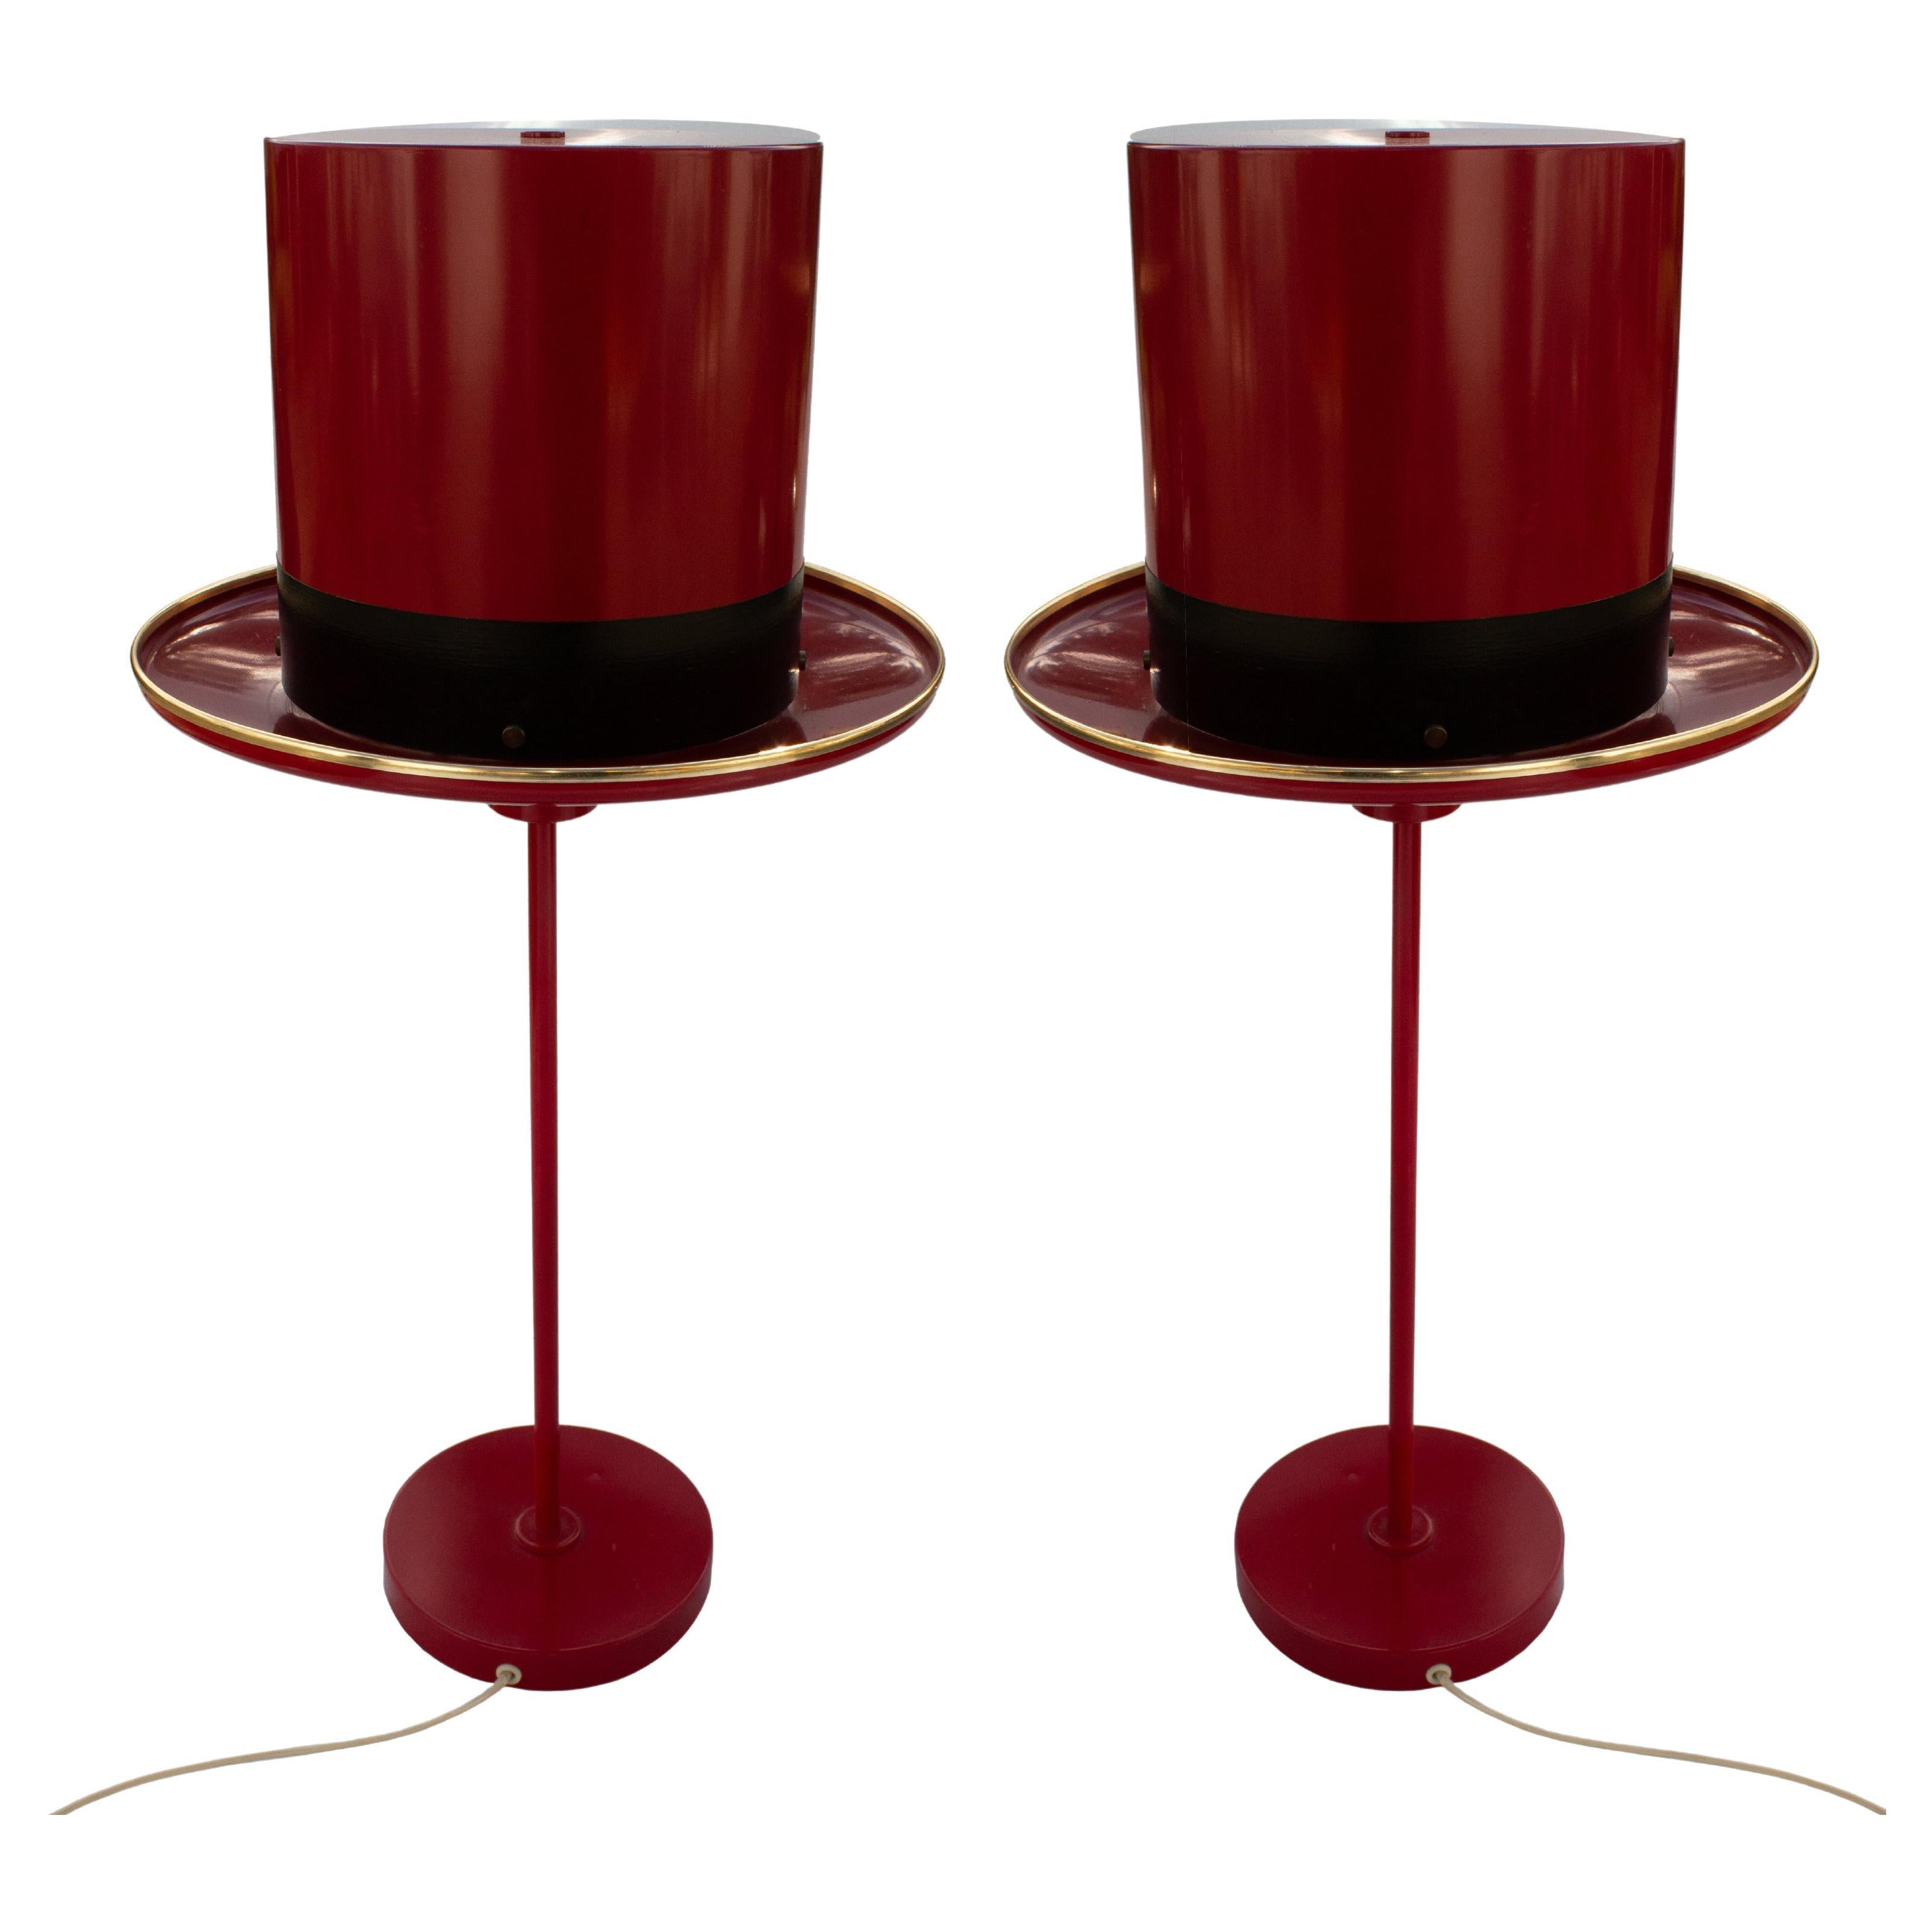 Pair of Scandinavian Modern Hans-Agne Jacobsson Red Table Lamps